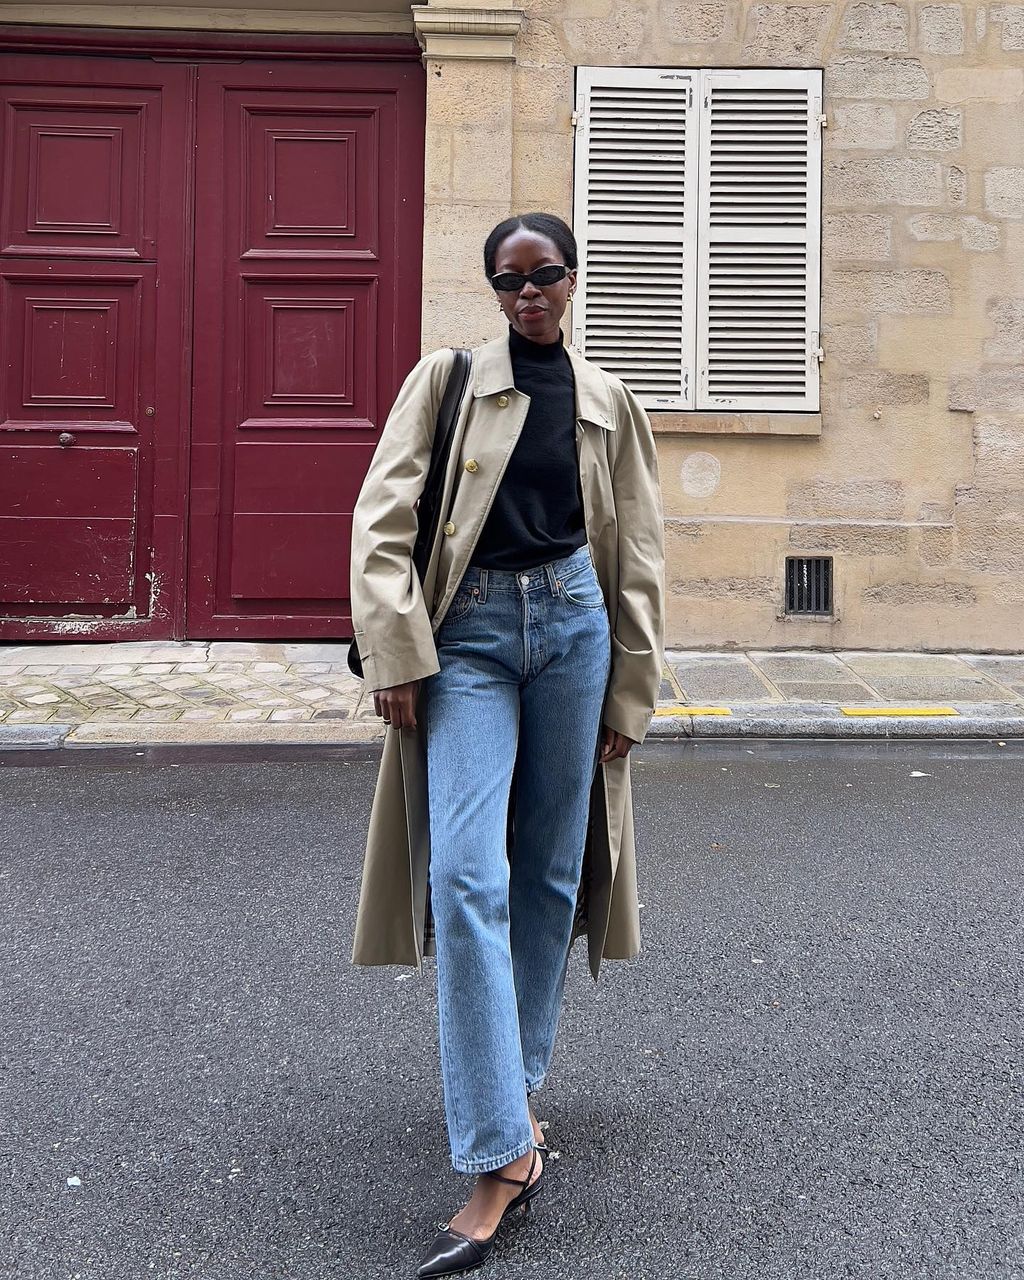 7 Classic Fall Outfit Ideas, Courtesy of French Women | Who What Wear